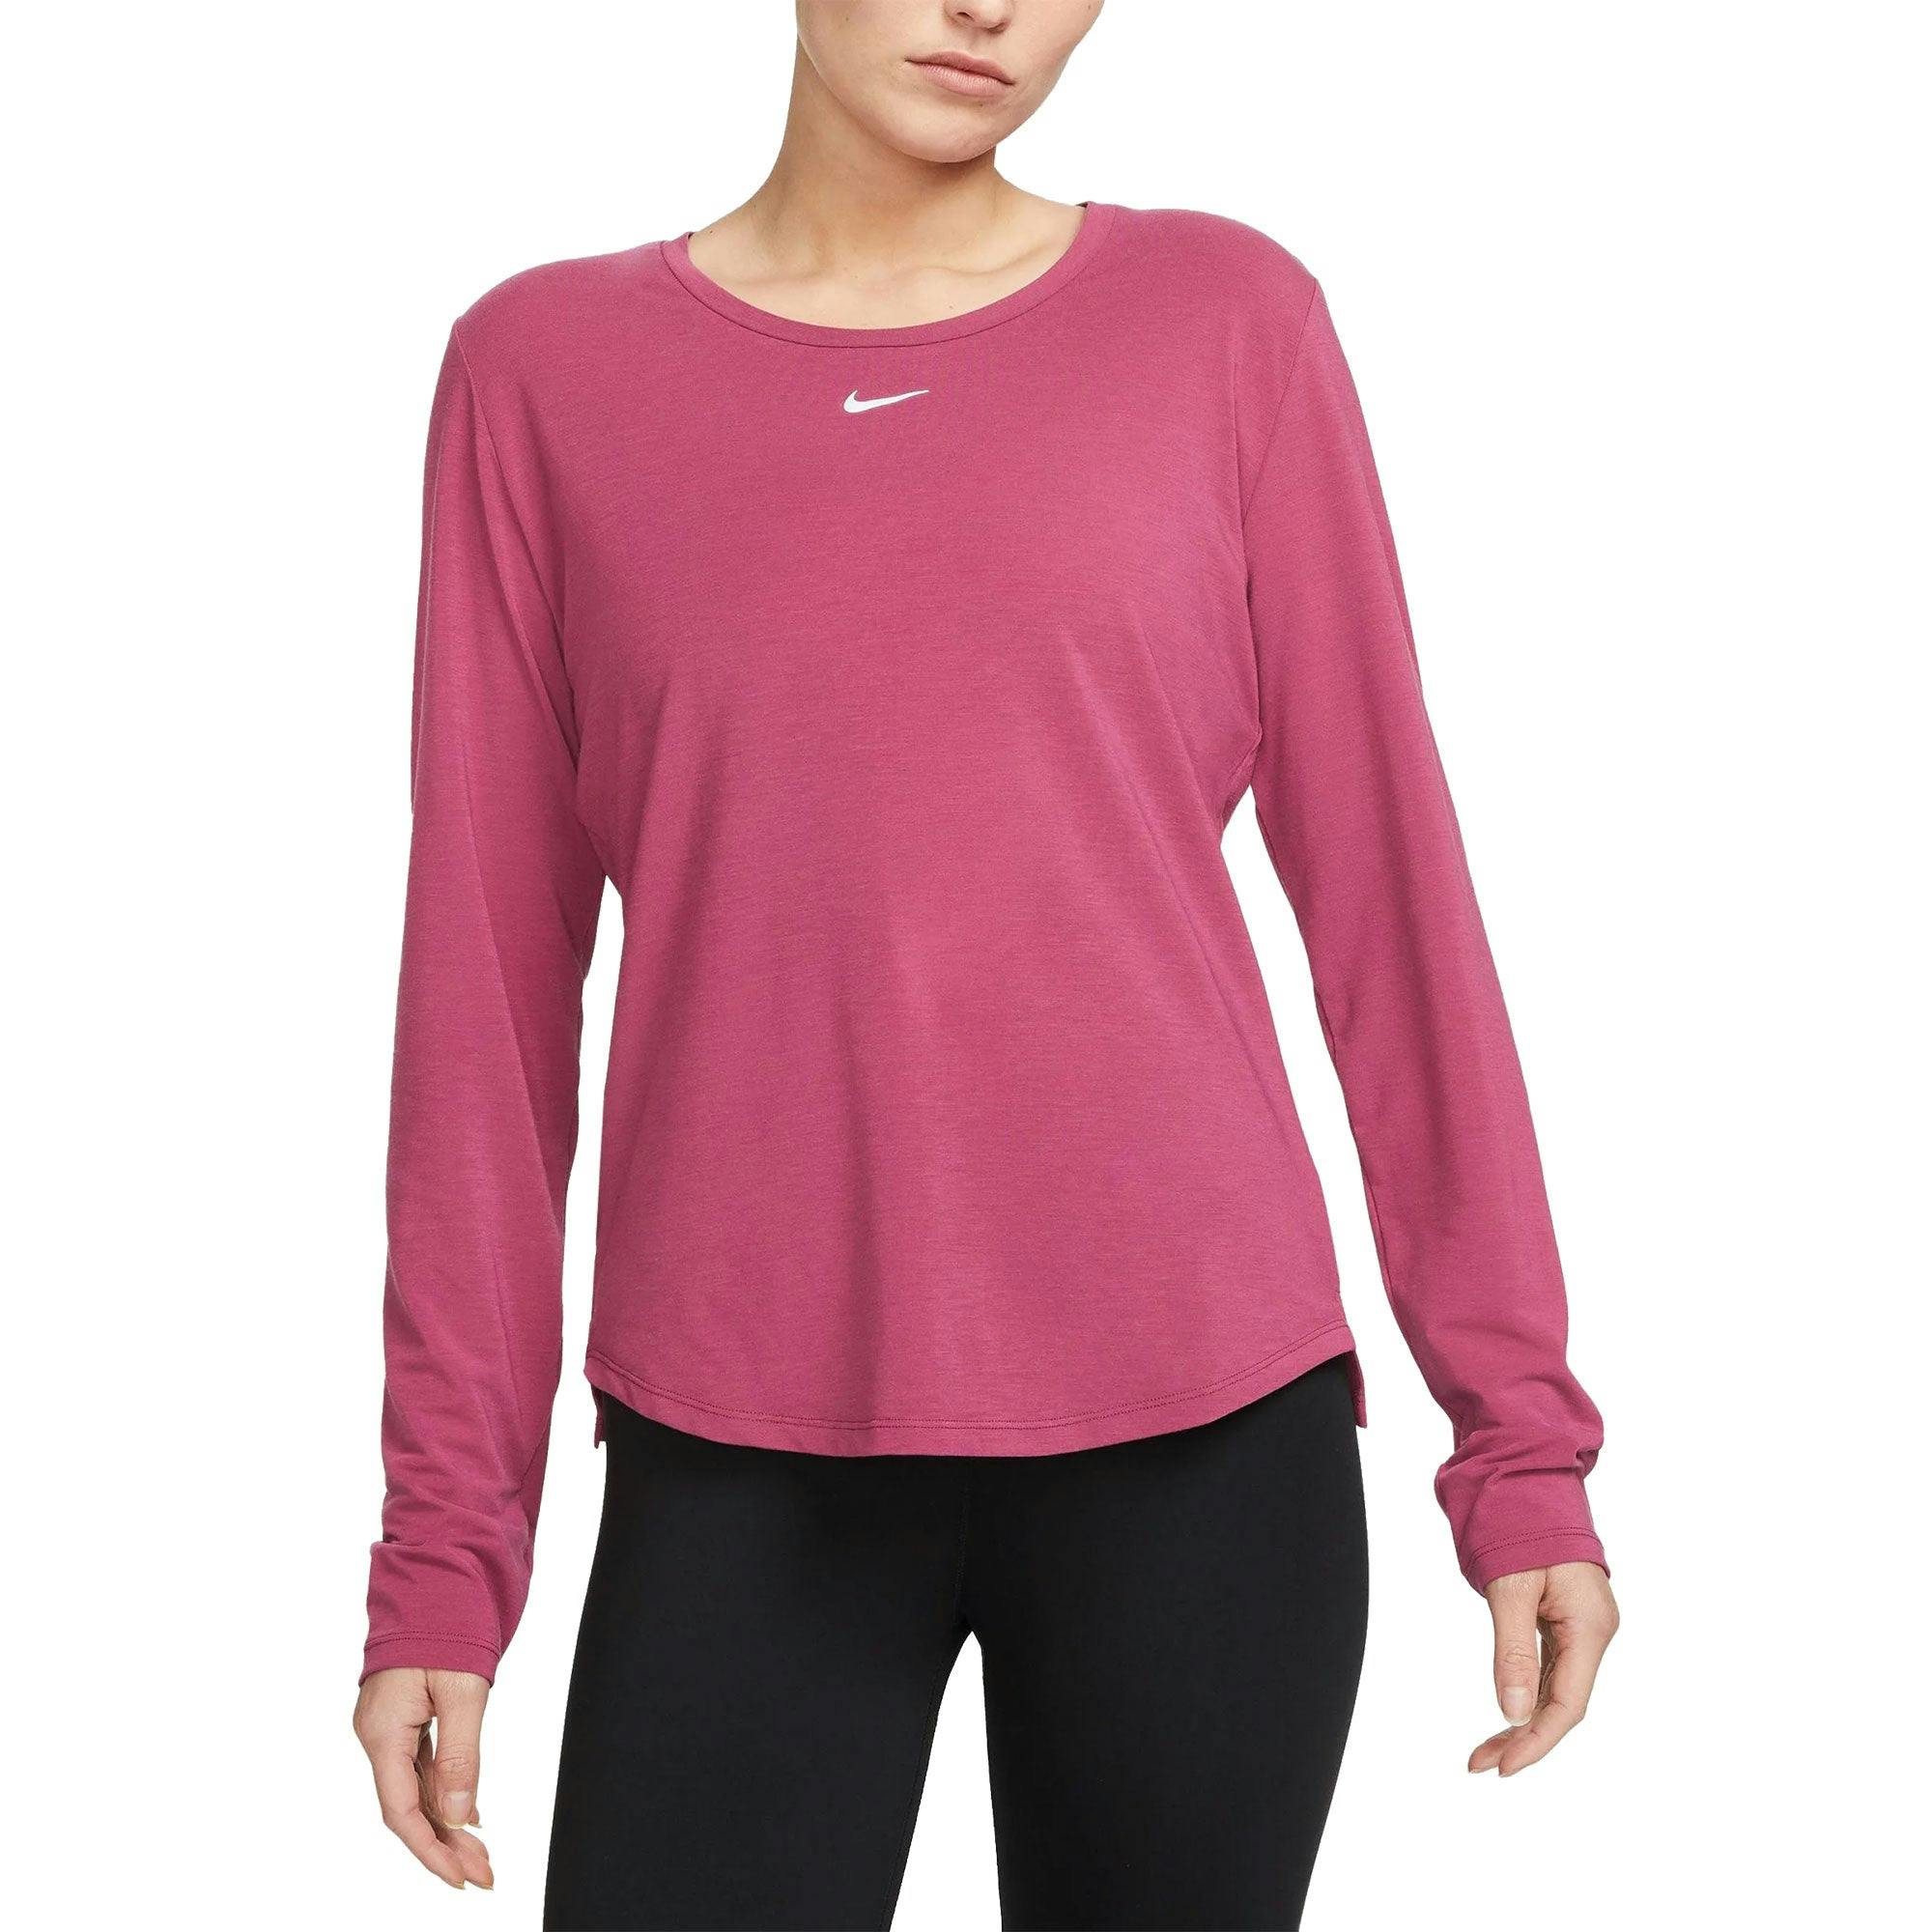 Nike Dri-FIT One Luxe Womens Long Sleeve Tennis Shirt - ROSEWOOD 653 / S